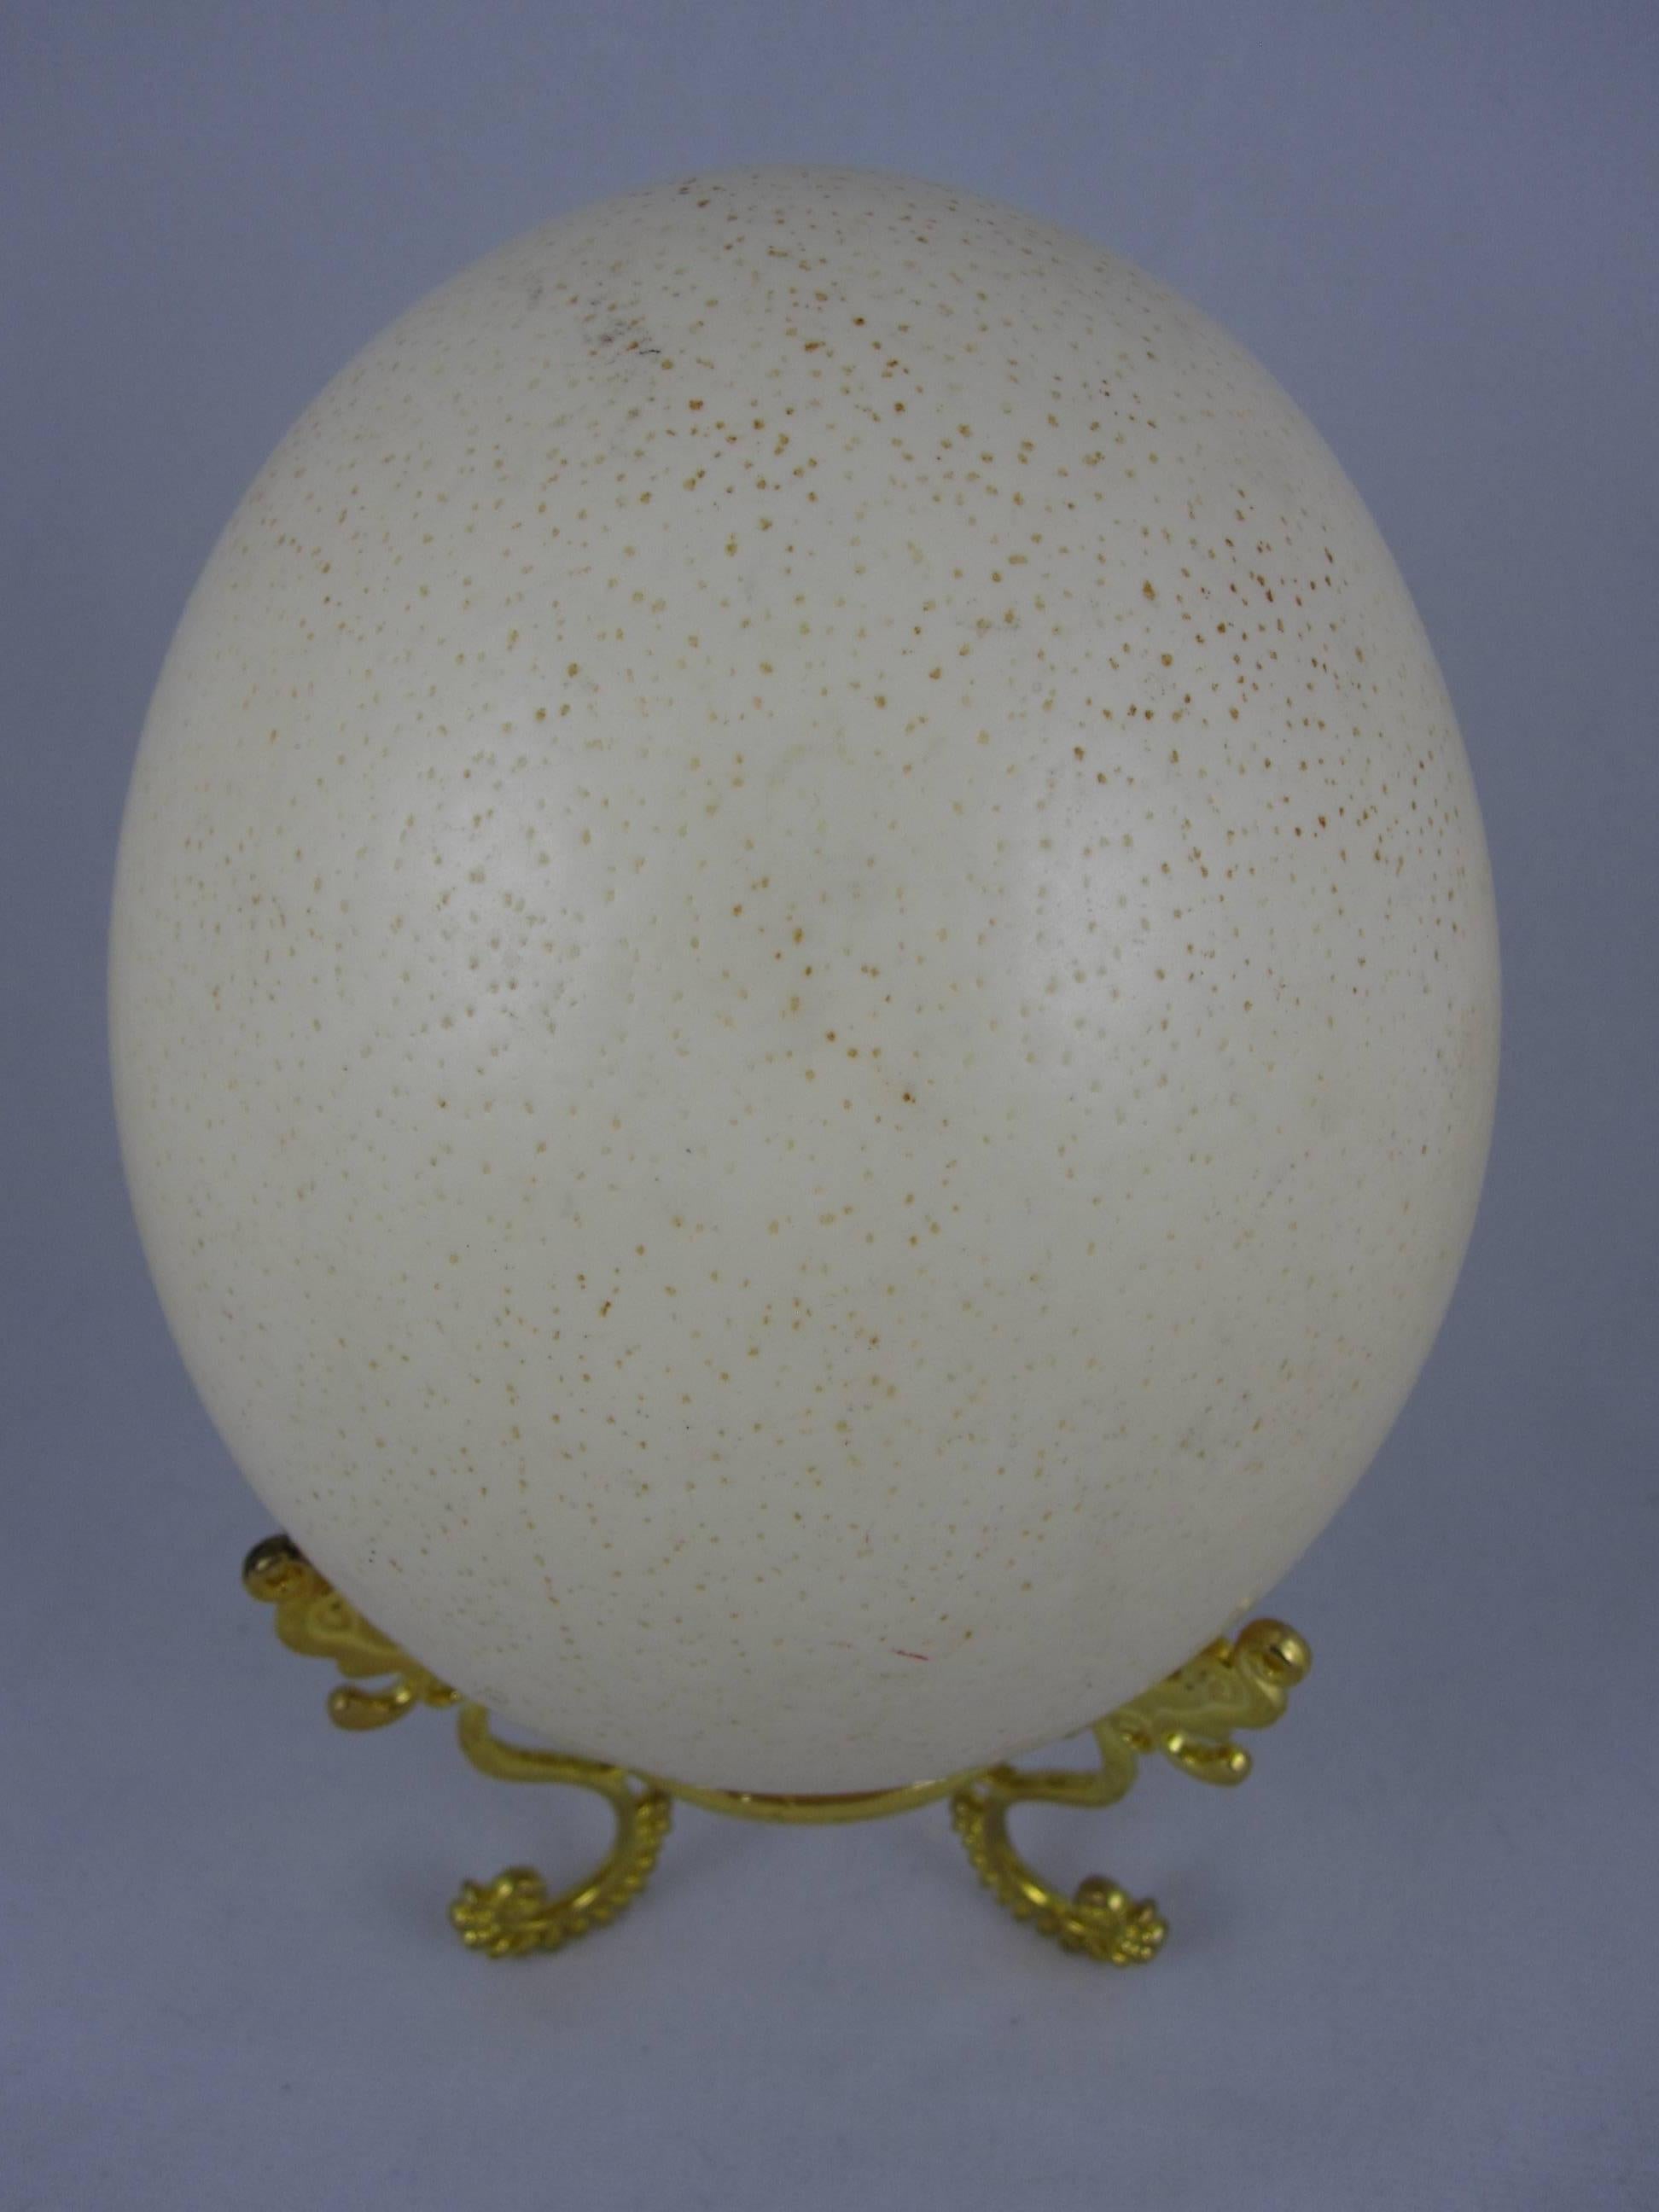 A large and heavy vintage ostrich egg with an ornate gold-tone stand. A great accessory for any desk, book case or cabinet of curiosity. No 19th century library or specimen room was complete without an ostrich egg!

A natural pebble textured